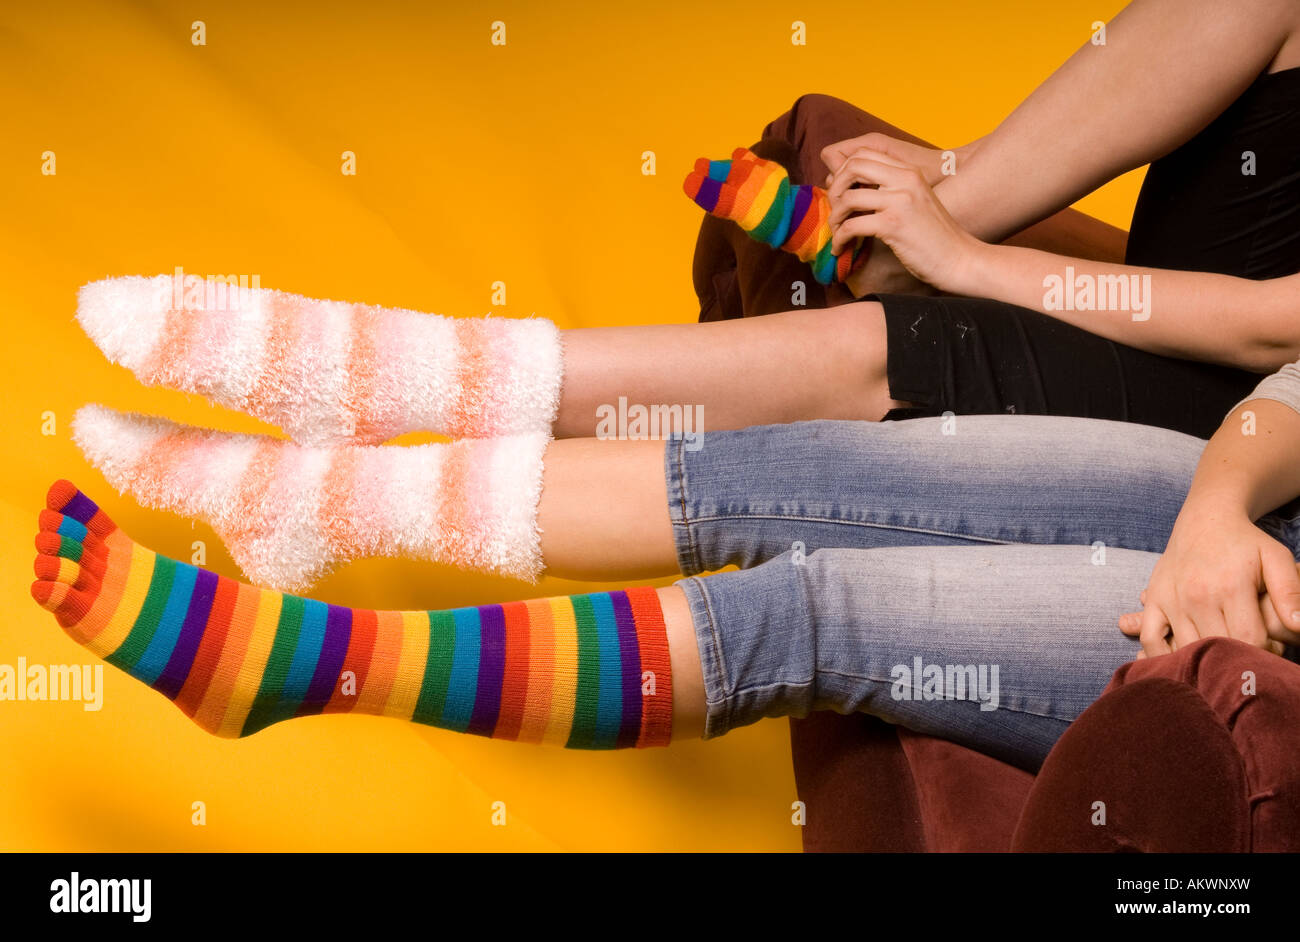 Two Teen Girls 1517 Wearing Colorful Mismatched Socks USA Stock